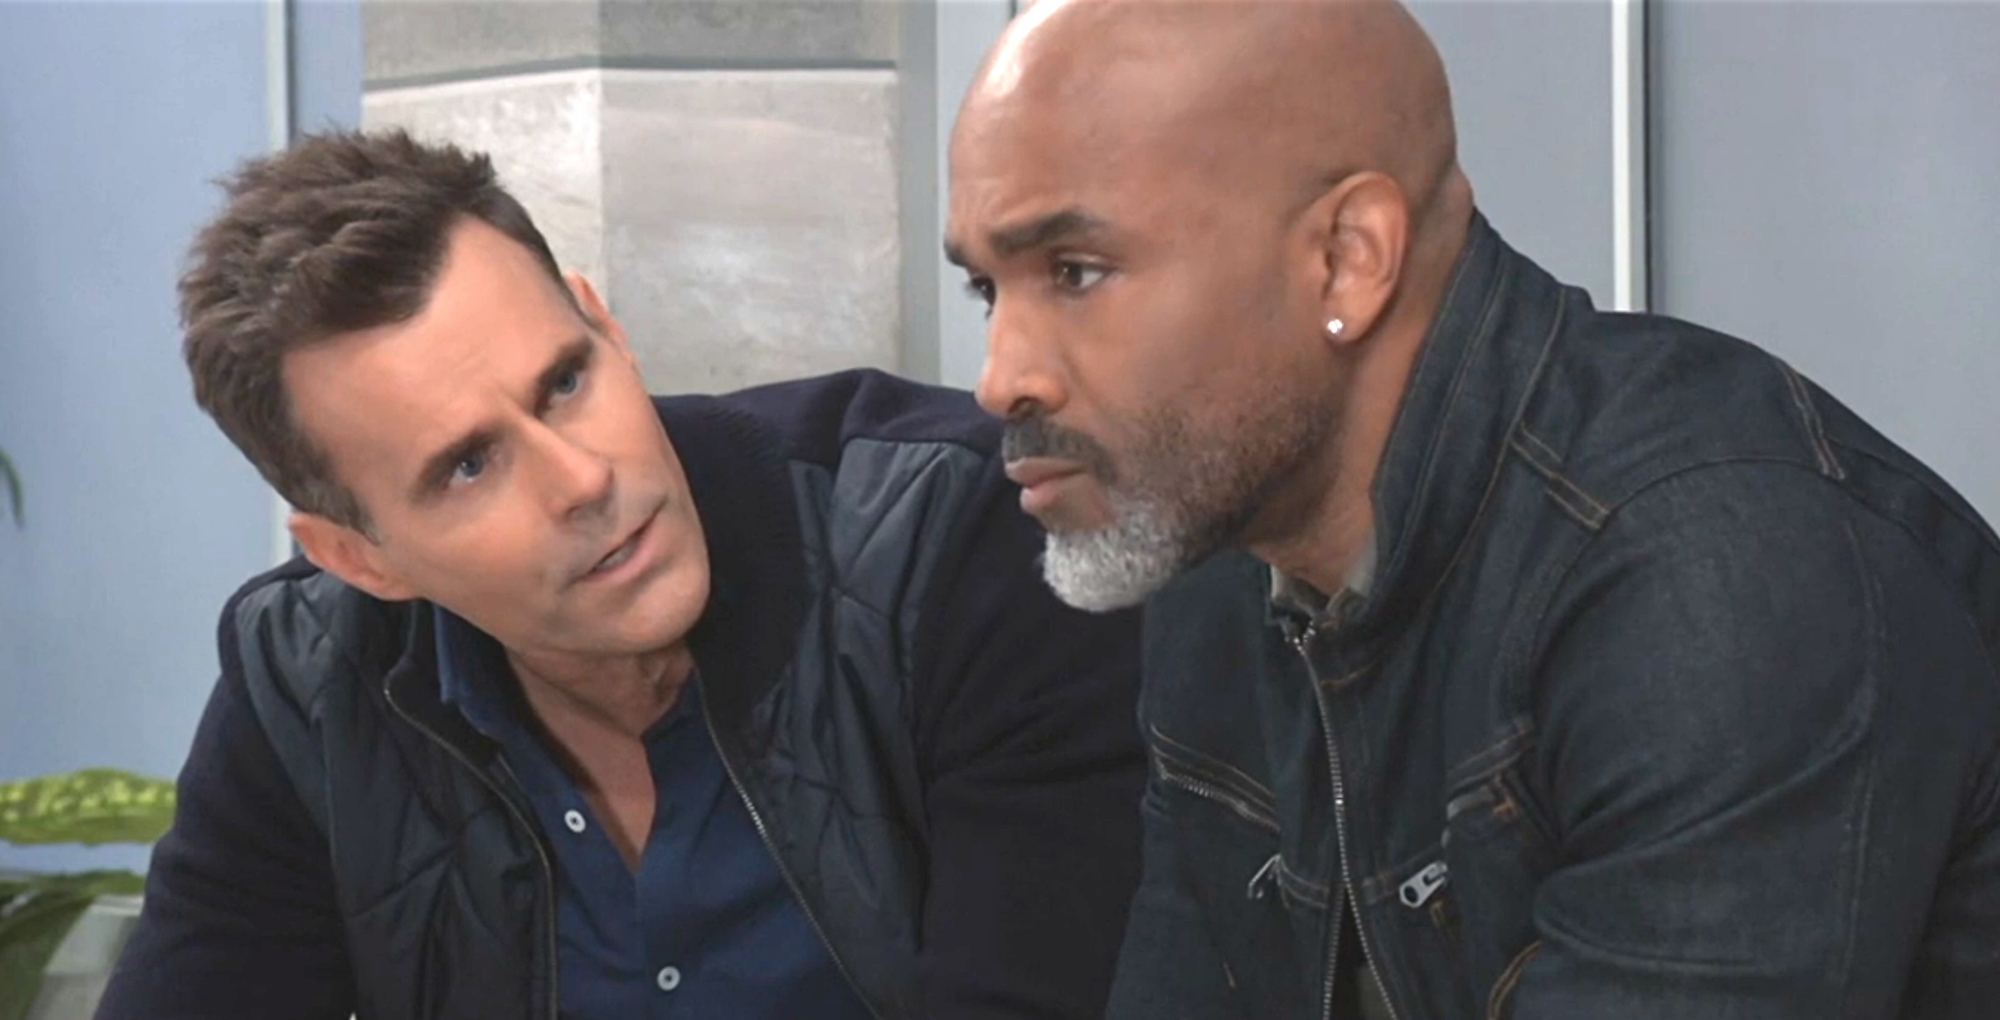 general hospital spoilers for april 21, 2023 have curtis and drew searching for answers.